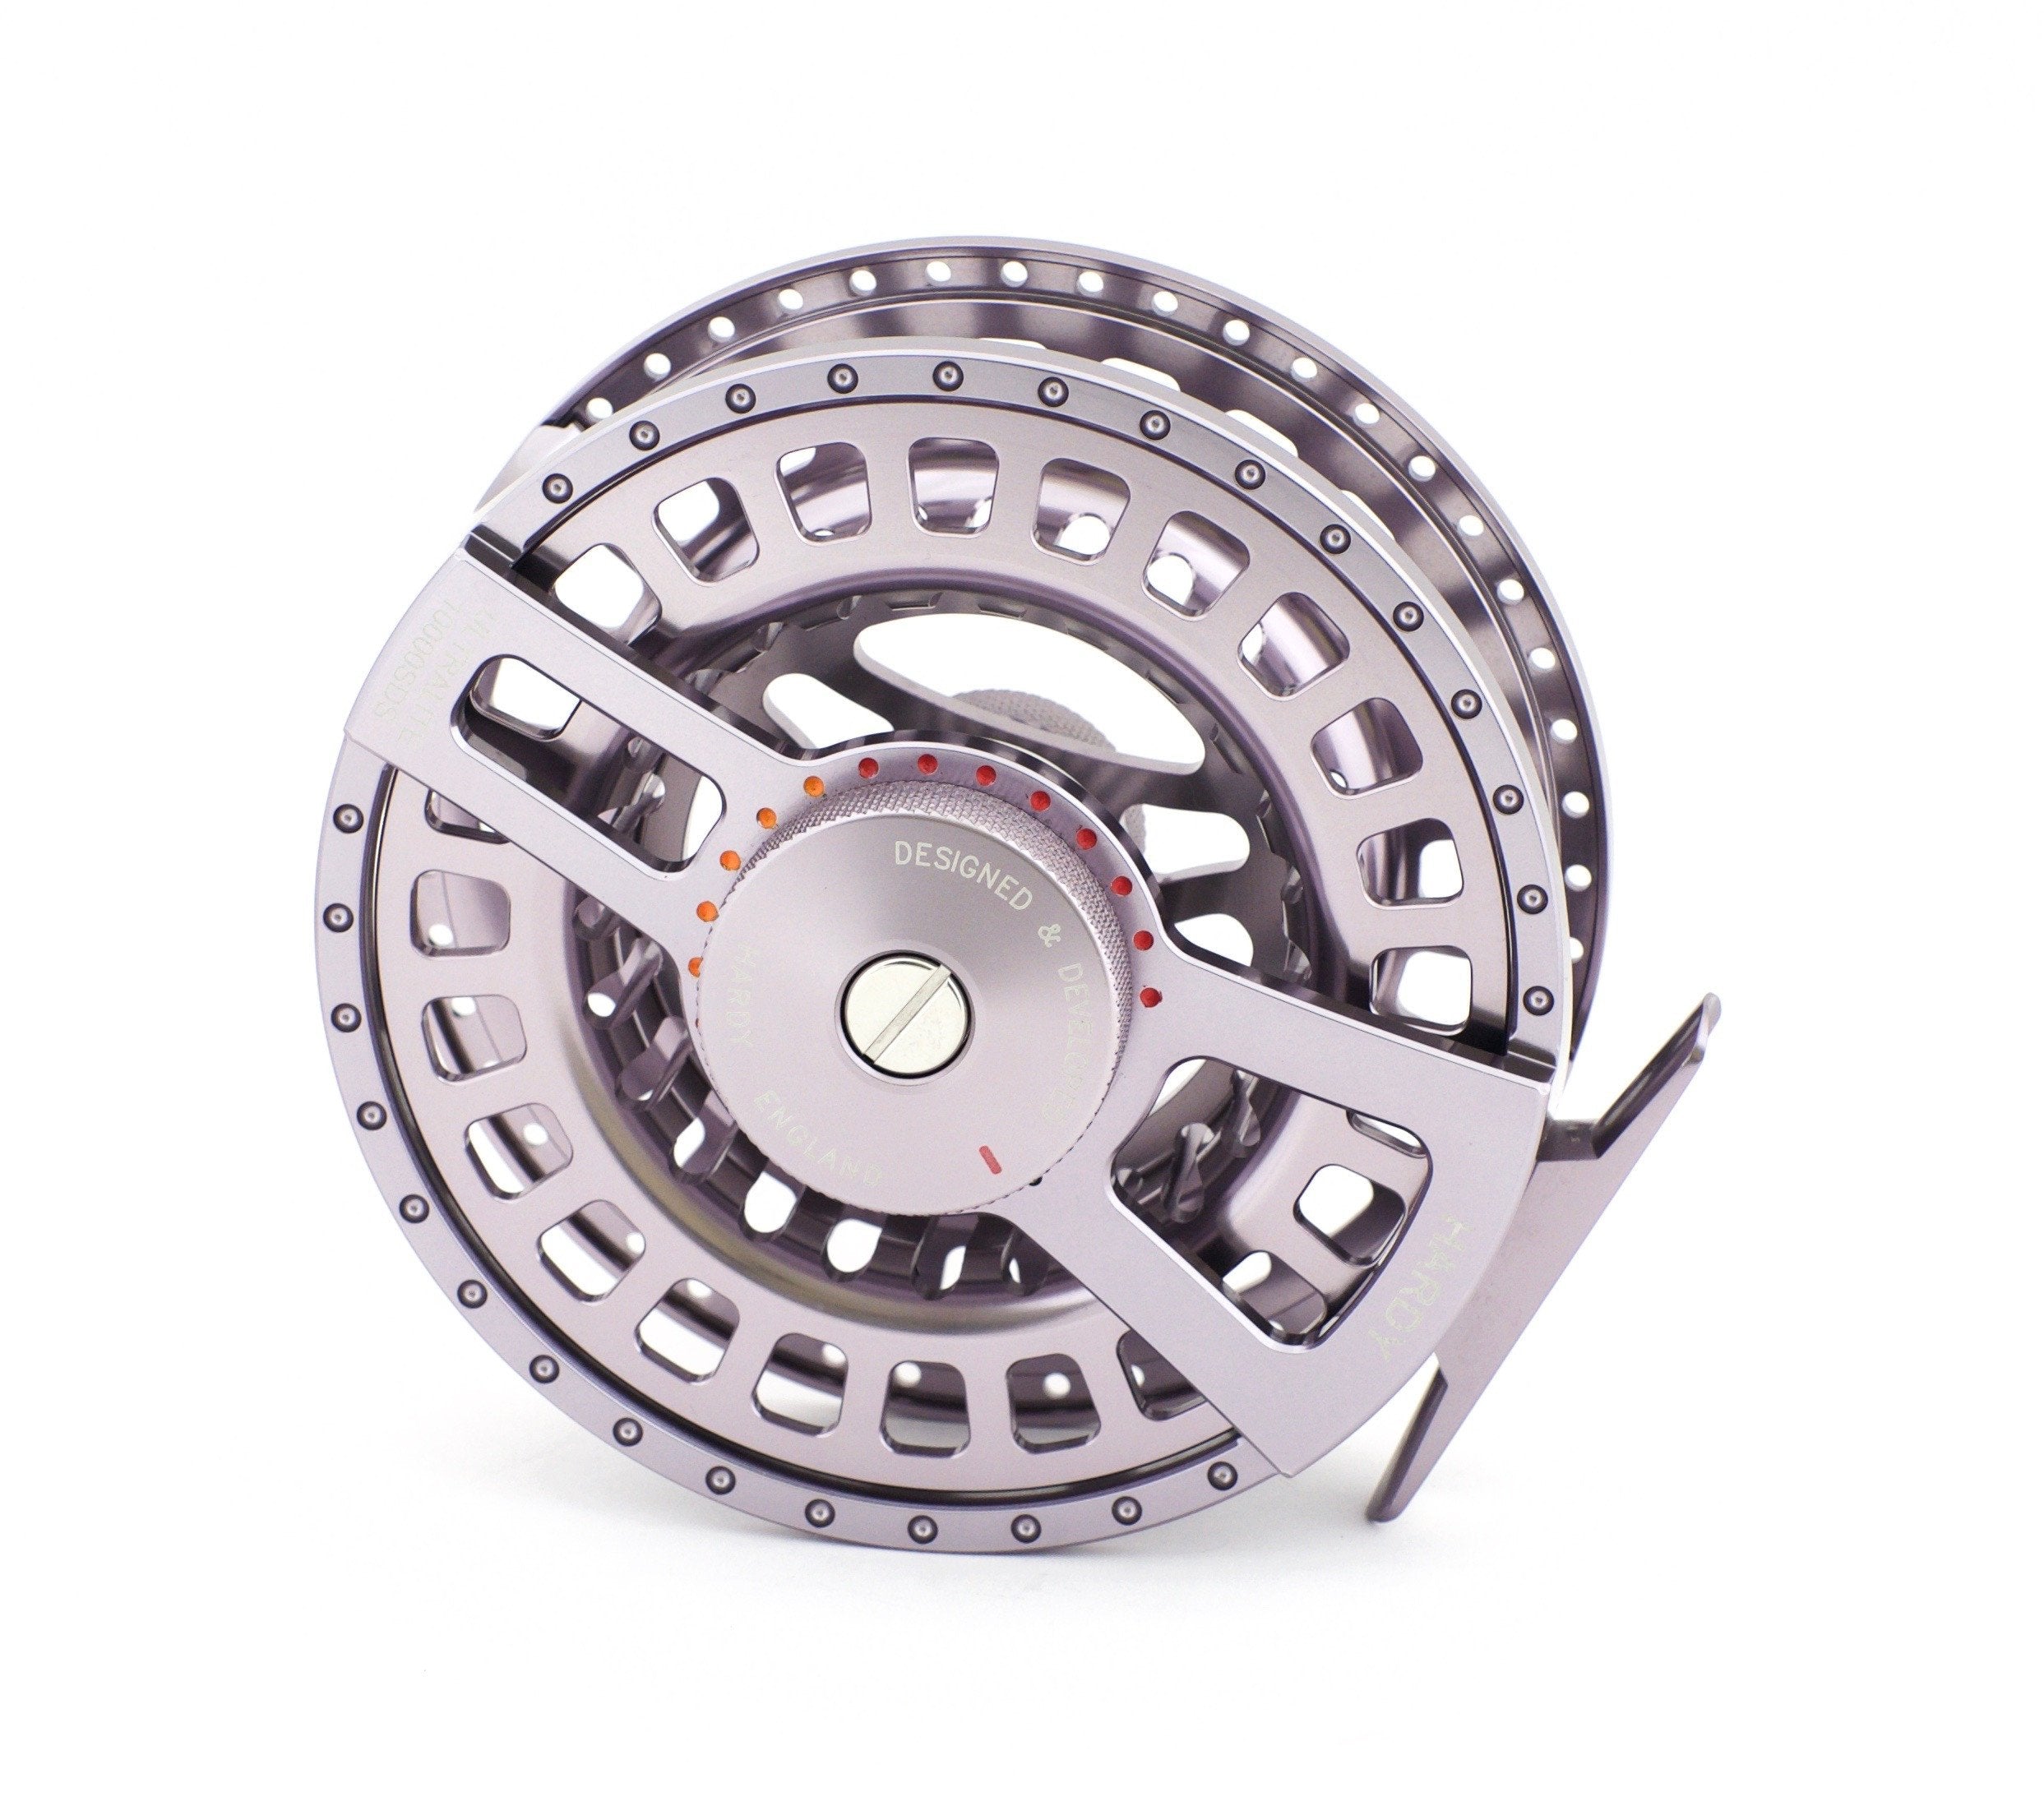 We have secured a very limited number of Hardy Ultralite Disc reels at a  hot price for December. These are brand new reels with neoprene